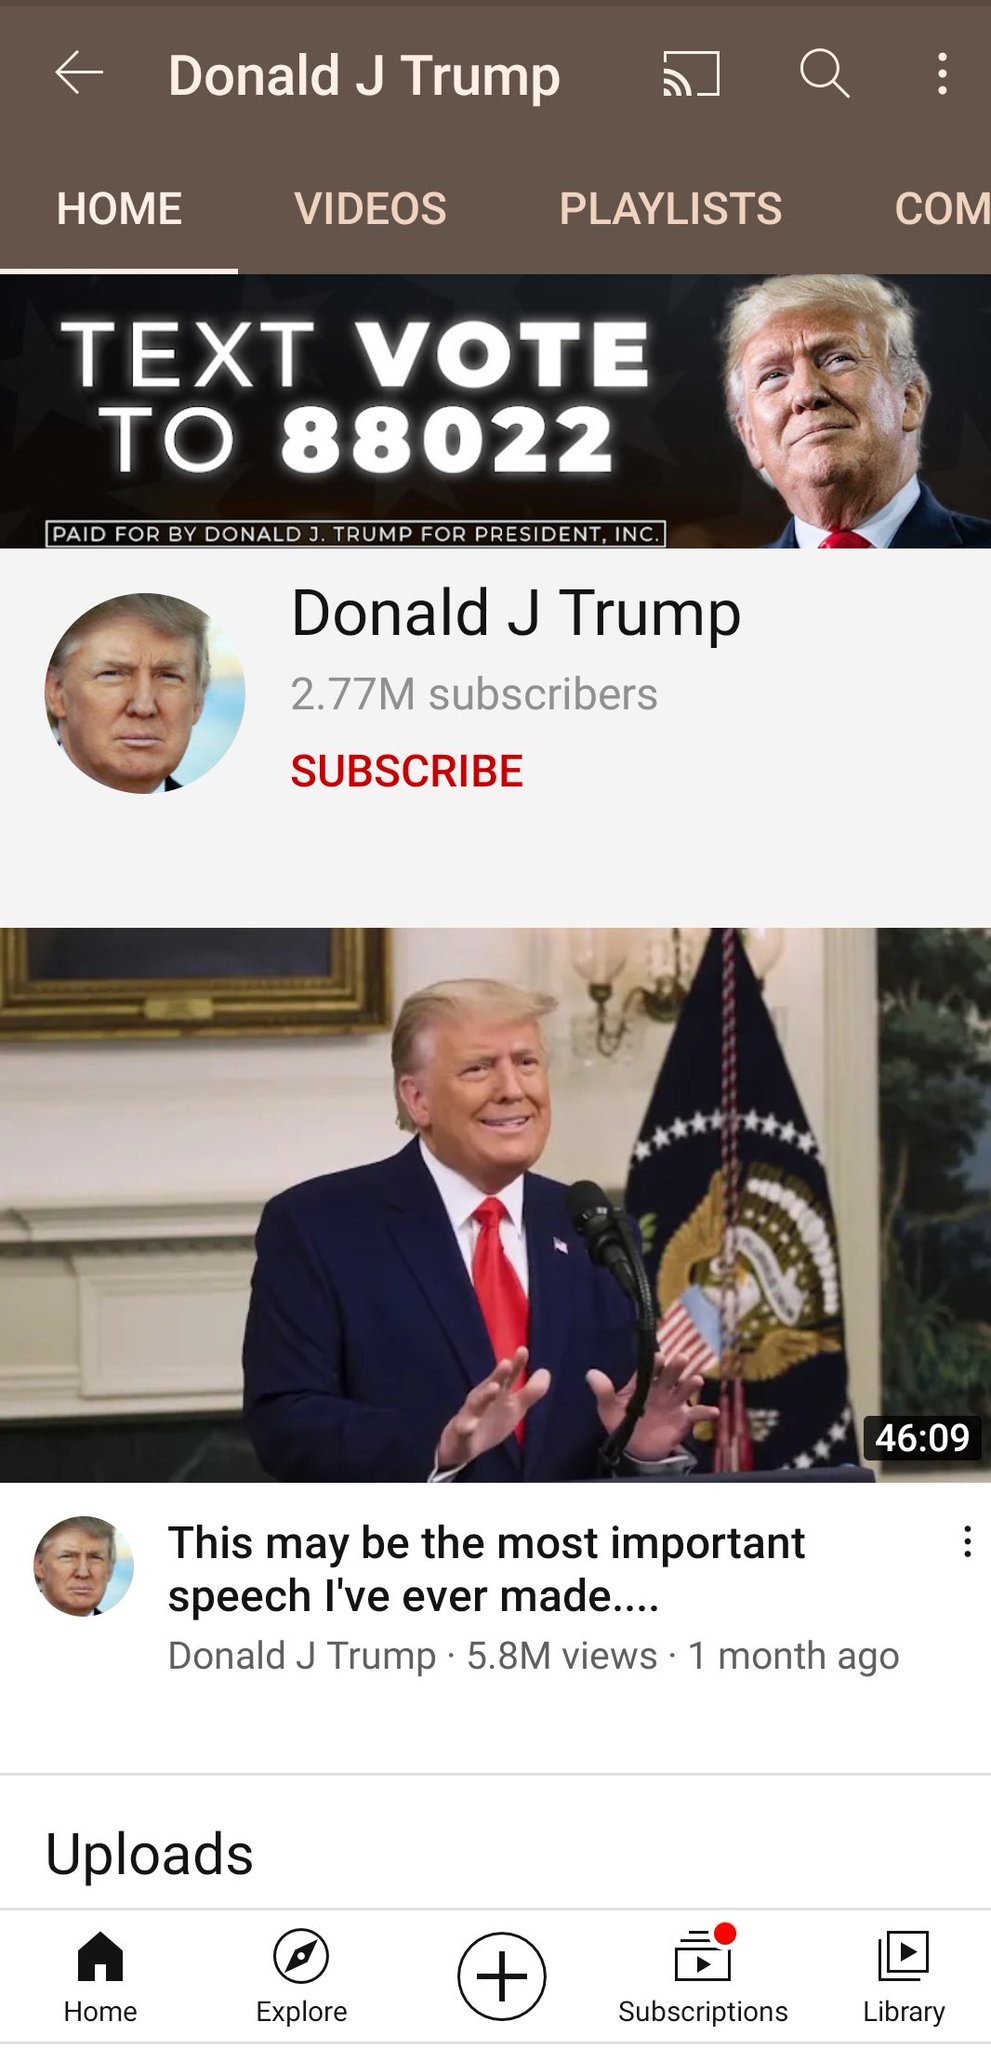  YouTube Suspends President Trump’s Channel for “Inciting Violence”